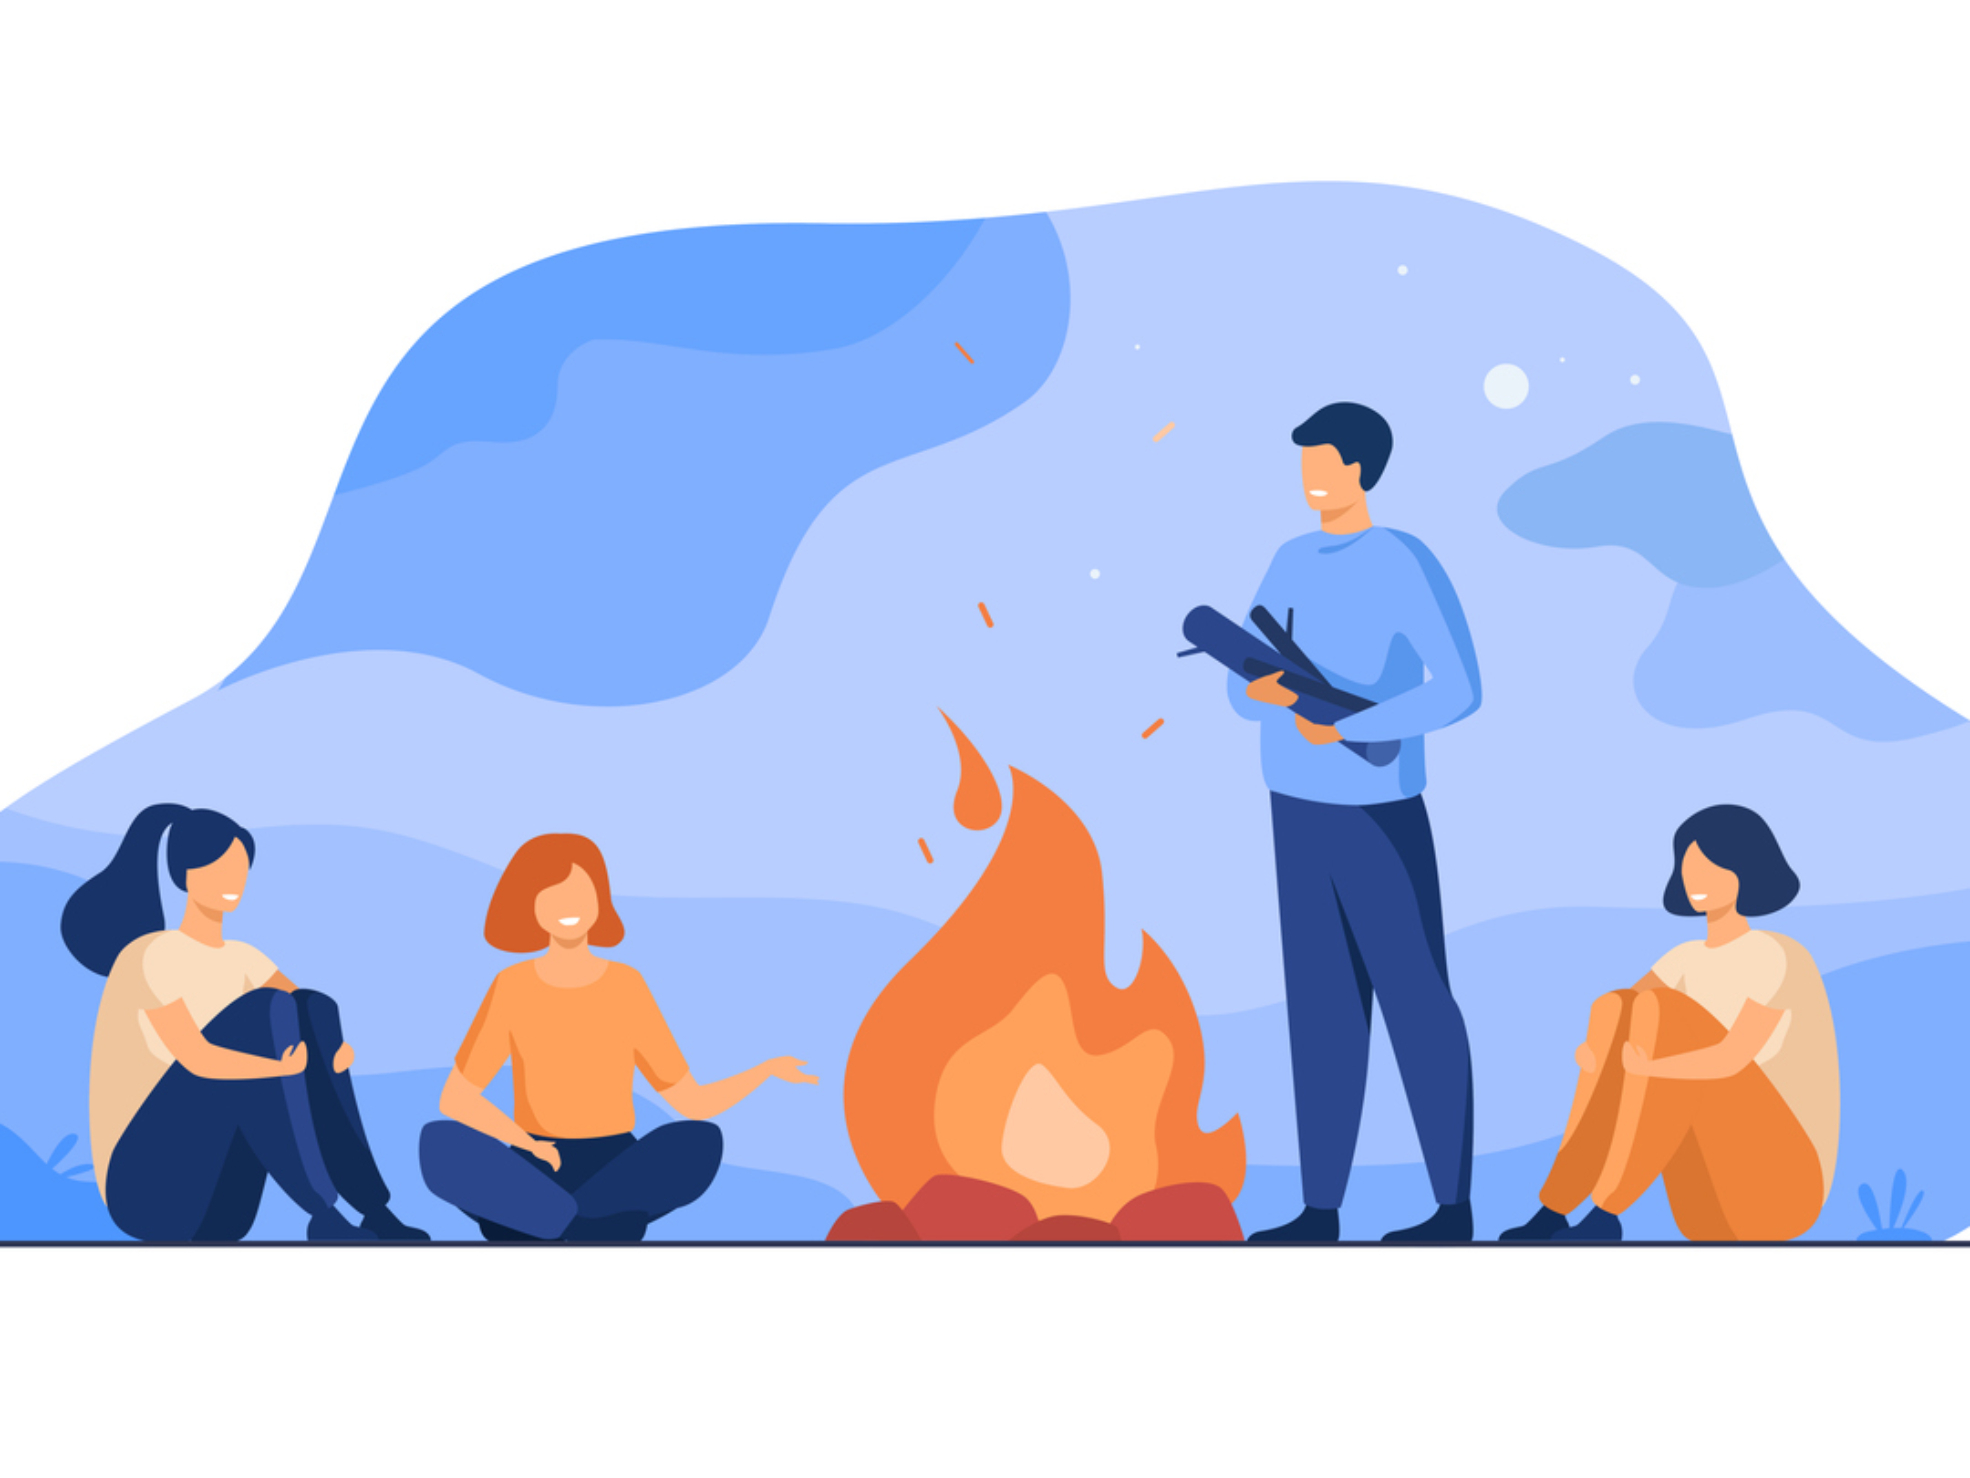 Campfire, camping, story telling concept. Cheerful people sitting at fire, telling scary stories, having fun. For summer outdoor activities or leisure time with friends topics